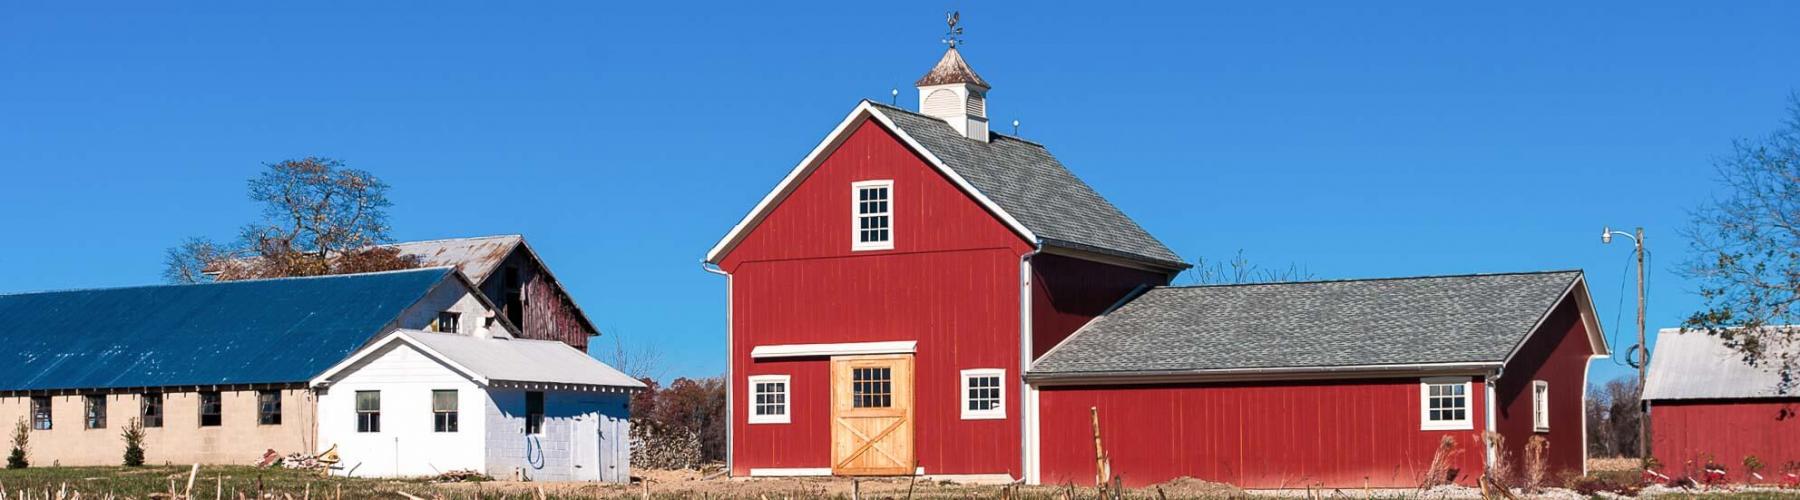 Barn and garage, restored by Stable Hollow Construction